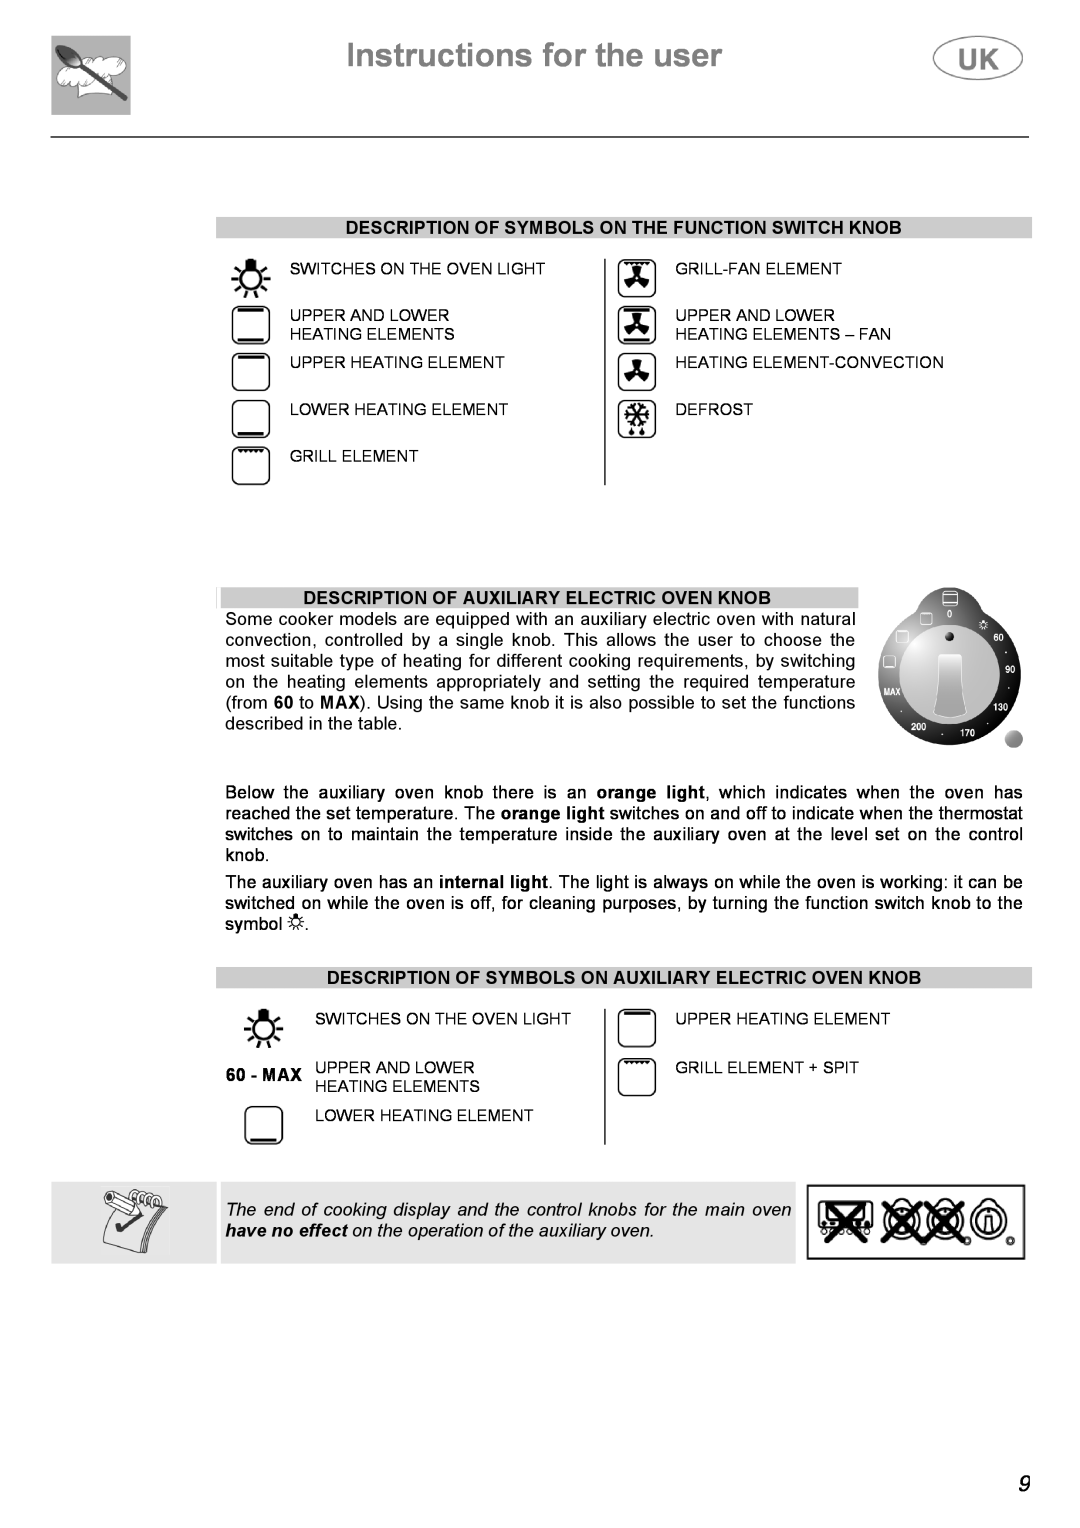 Electrolux C41022GN manual Description Of Symbols On The Function Switch Knob, Description Of Auxiliary Electric Oven Knob 